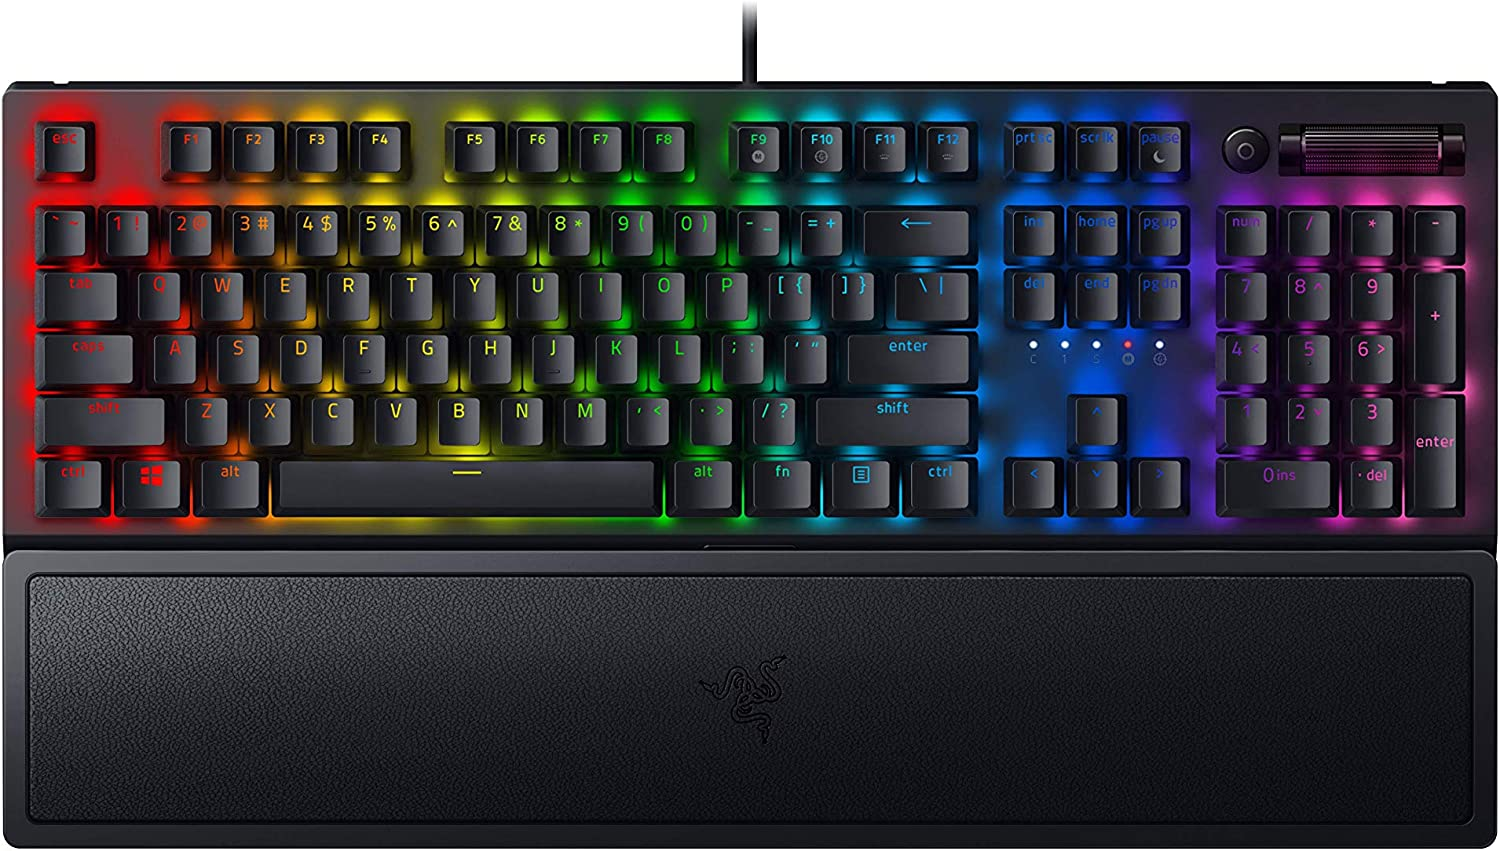 Not all mechanical gaming keyboards are noisy as some are designed with linear switches which make it possible to press keys quietly.